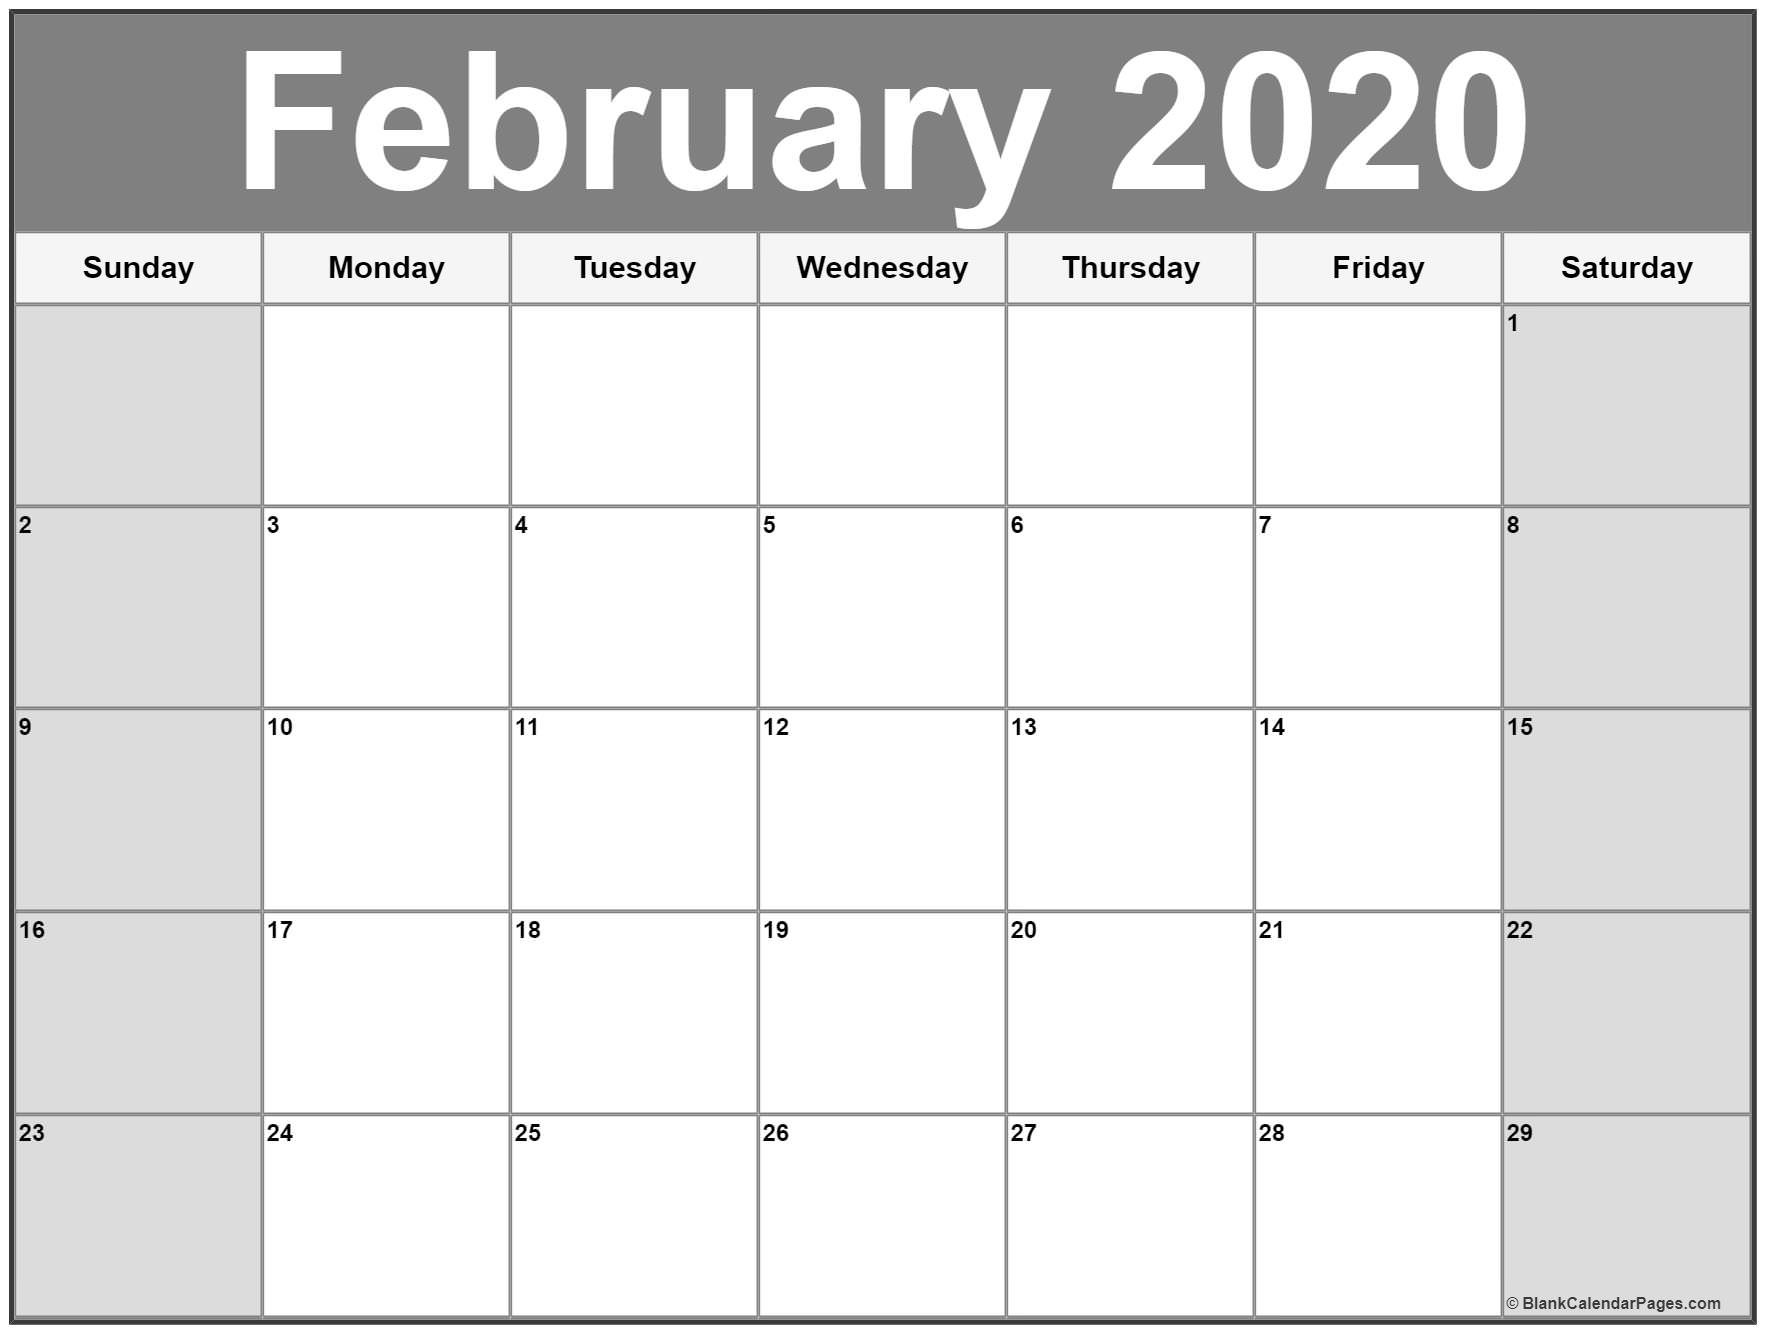 Free Monthly February Calendar 2020 Printable Template